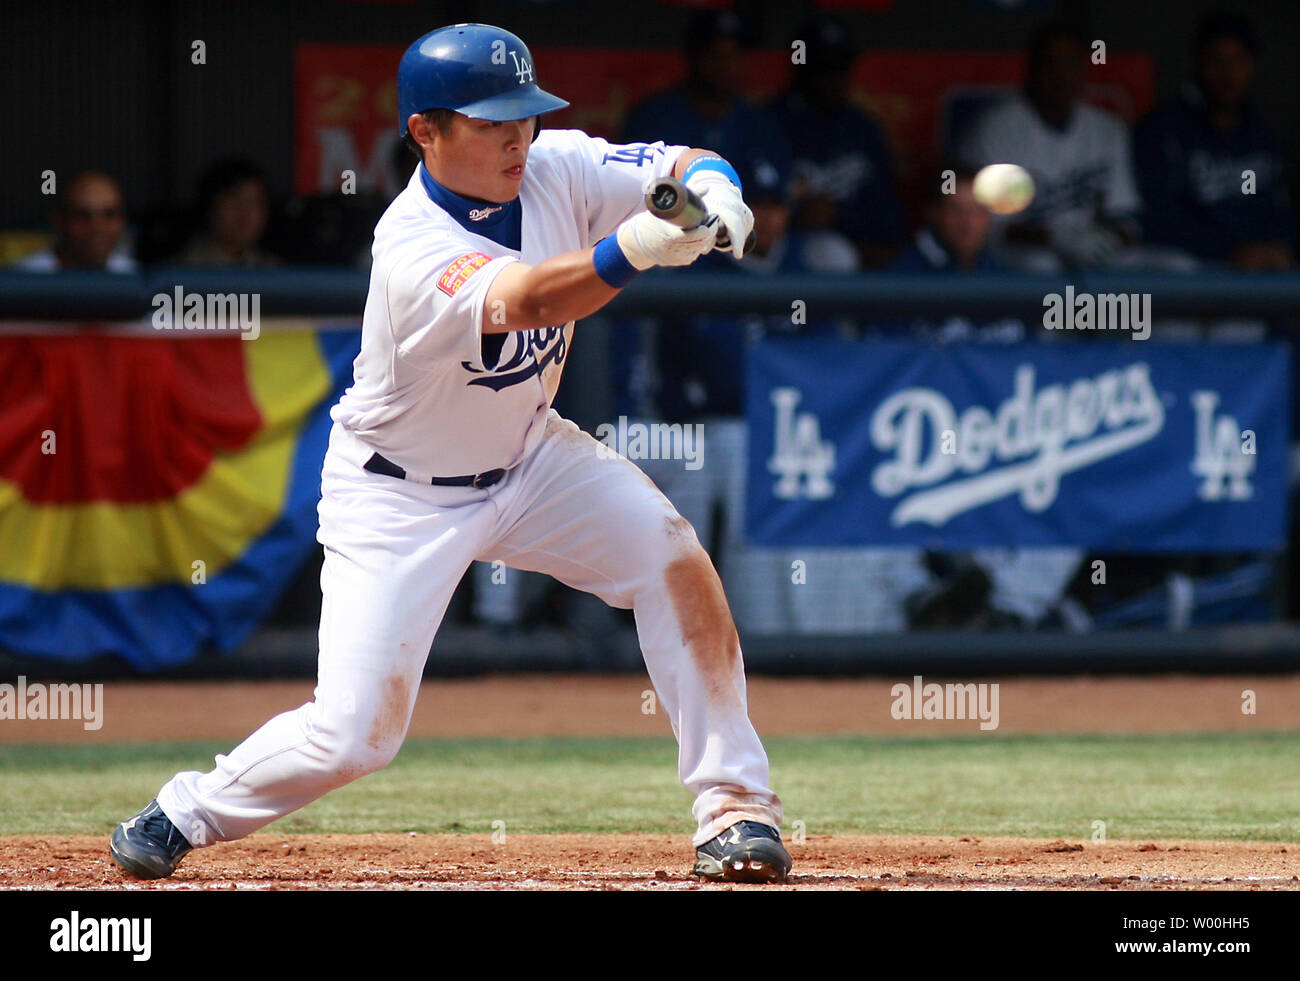 Los Angeles Dodgers' Chin-lung Hu attempts to bunt during their second game against the San Diego Padres in the 2008 Major League Baseball (MLB) China Series at Wukesong Stadium in Beijing March 16, 2008. The San Diego Padres beat the Los Angeles Dodgers 6-3.  (UPI Photo/Stephen Shaver) Stock Photo